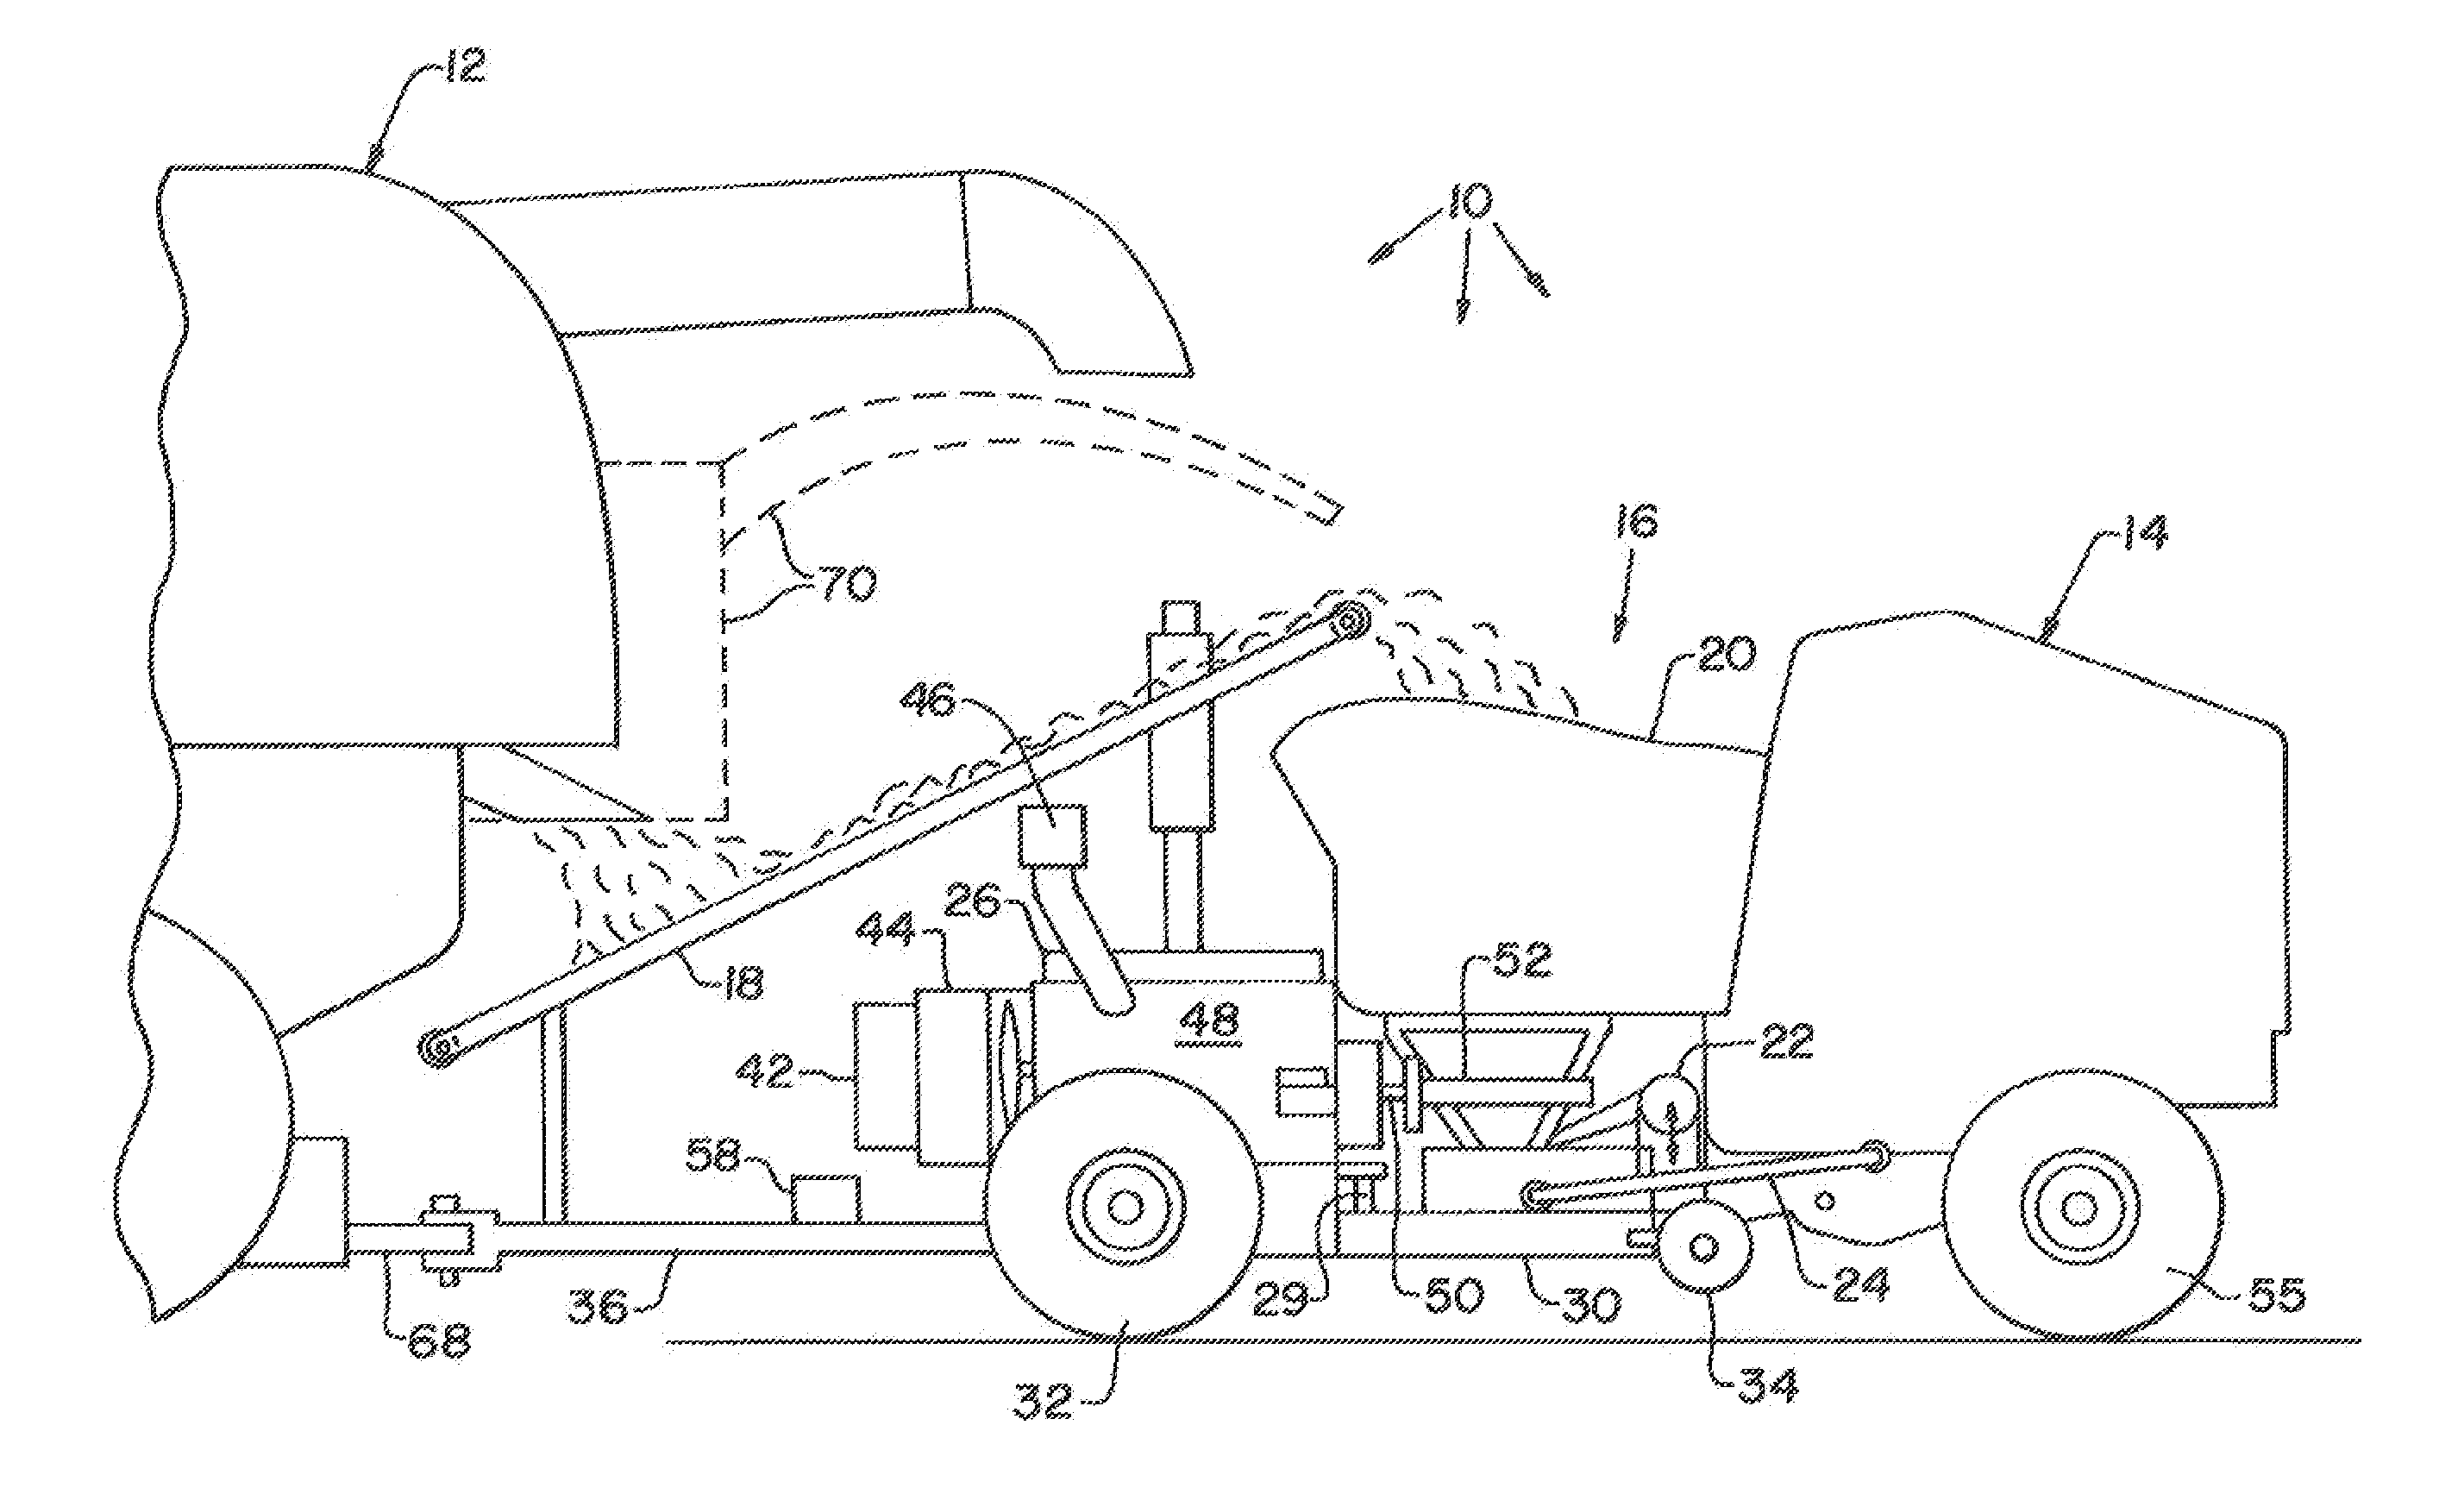 Tugger/Accumulator For Use With An Agricultural Biomass Harvester